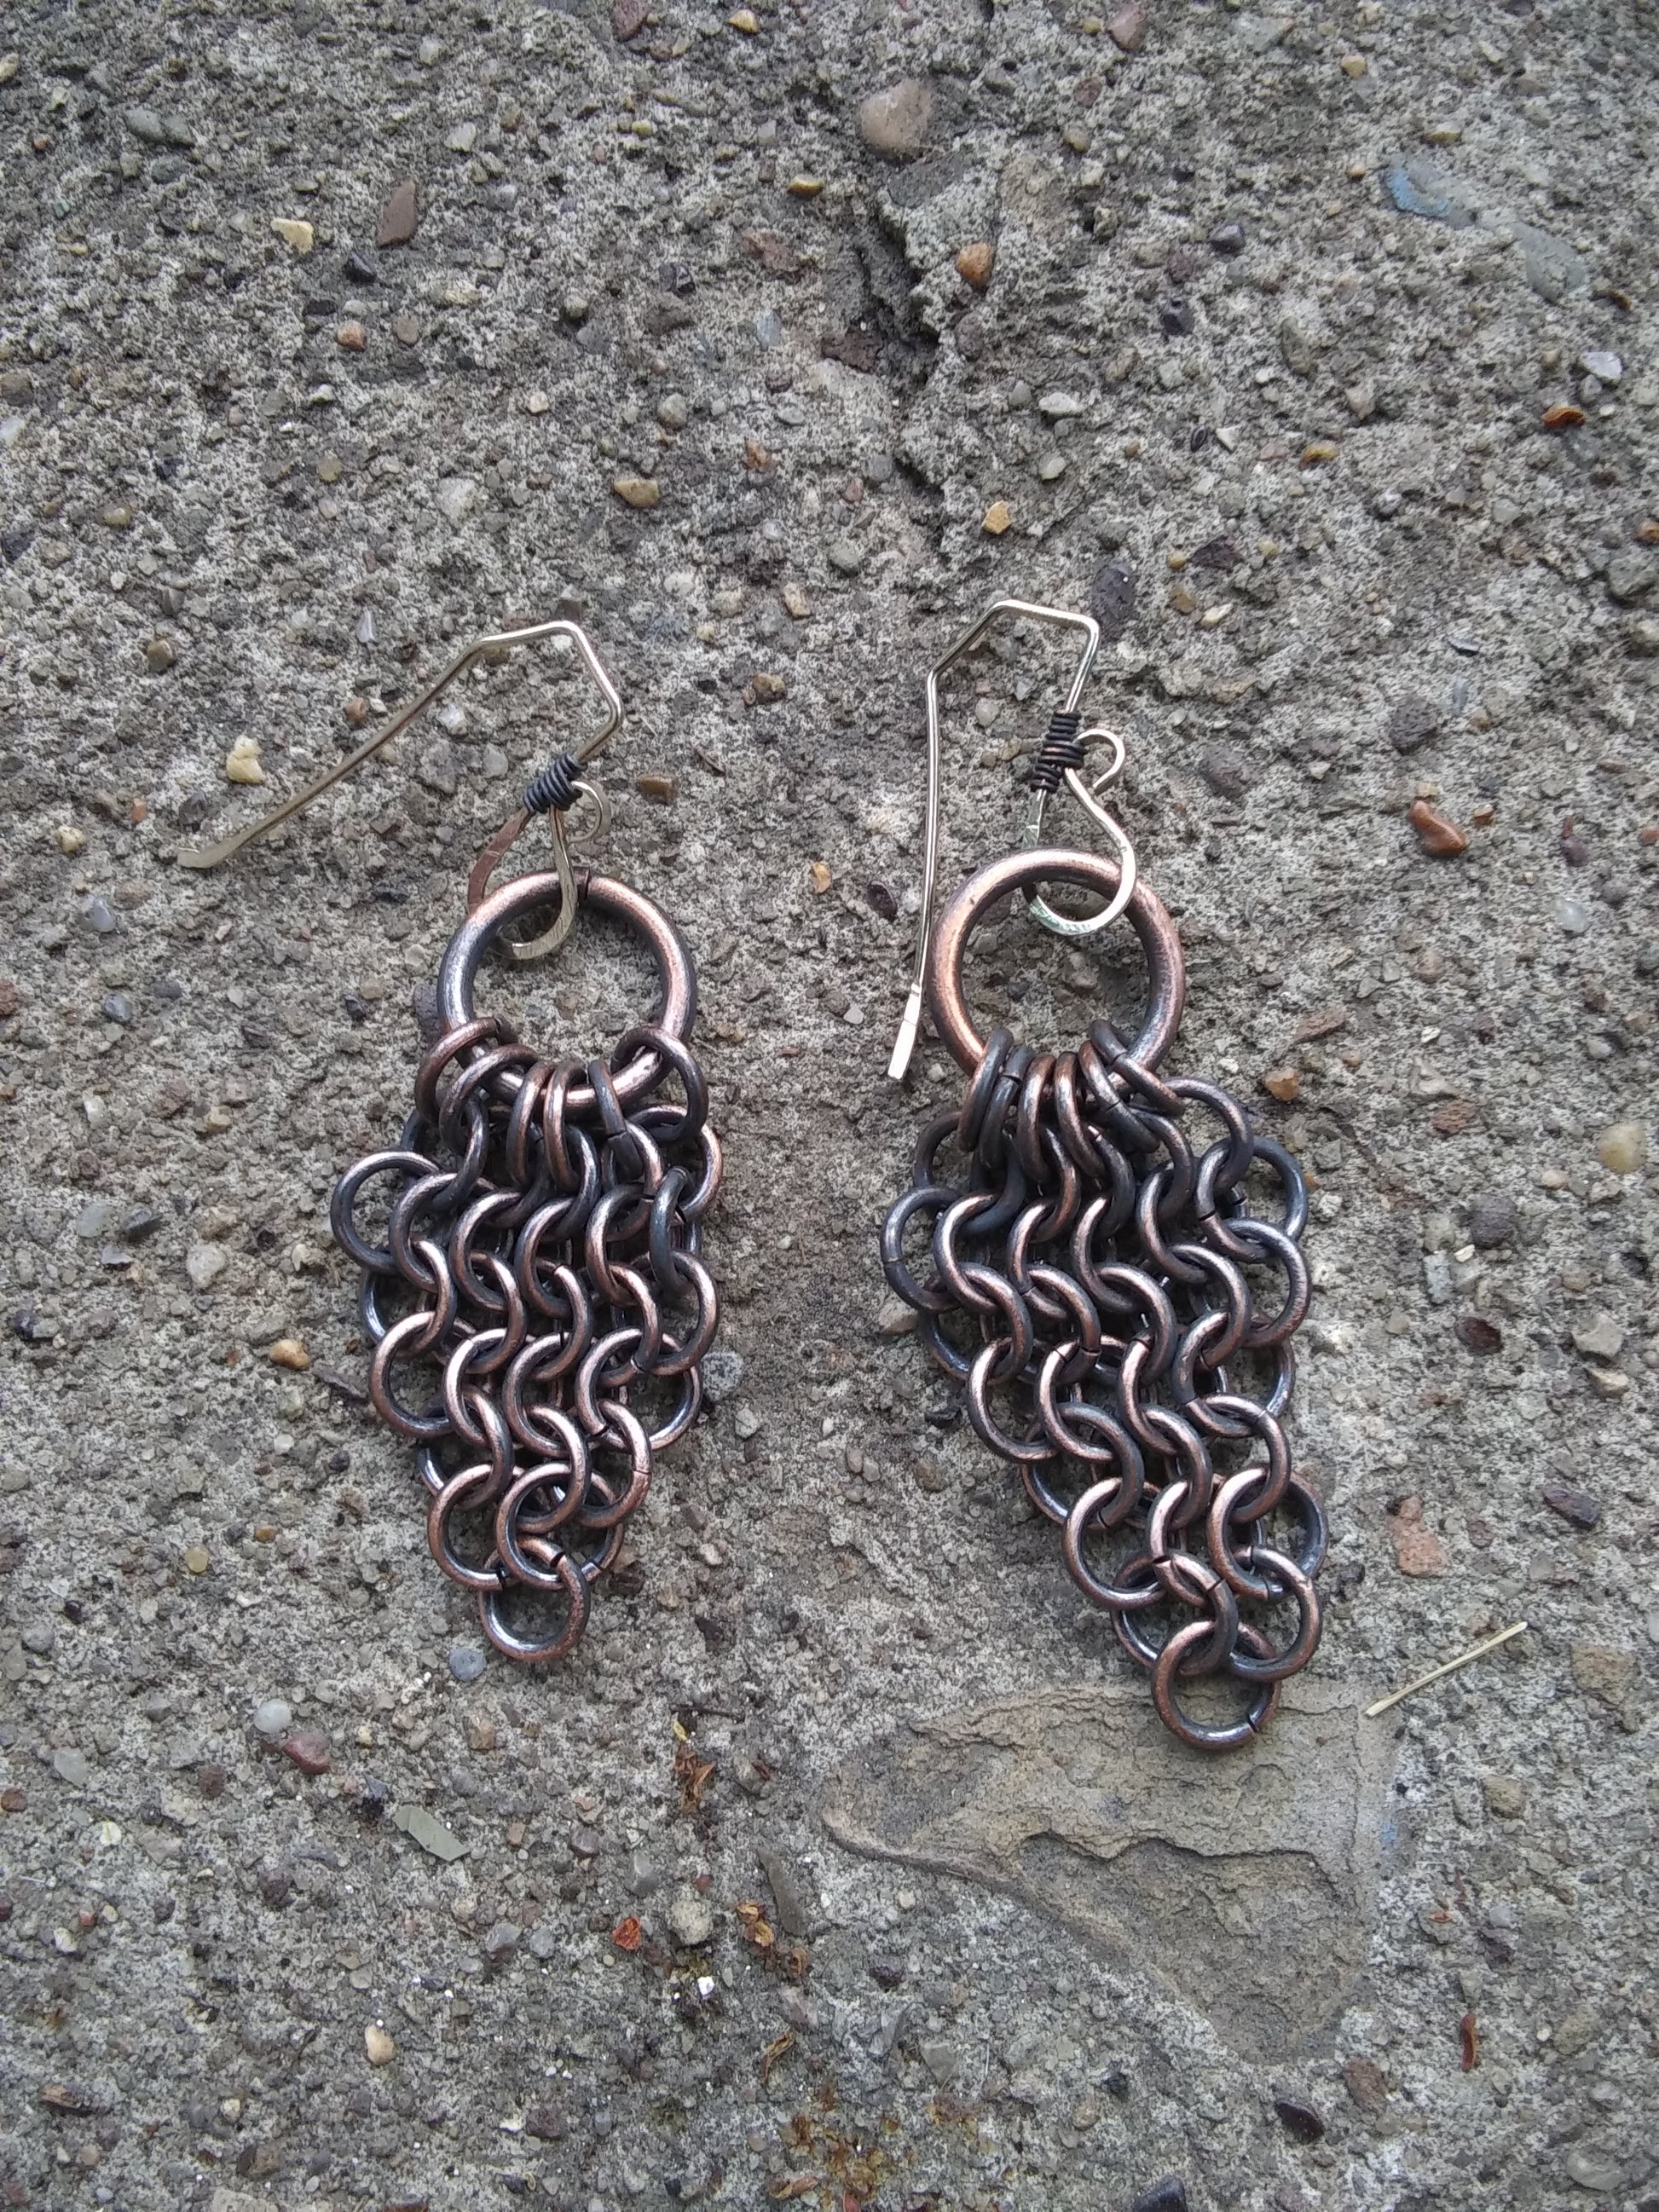 witch store pittsburgh, small chainmail earrings, gothic chainmail hoop earrings , elegant chainmail earrings, elegant chainmail, distressed jewelry, distressed earrings, distressed copper jewelry, distressed copper earrings, goth girl earrings, distressed copper, dark copper jewelry, dark copper earrings, copper hoops, copper earrings hoops, copper earrings, copper chainmail dangles, copper chainmail, copper chain link earrings, copper bib chainmail hoop earrings, artisan copper earrings